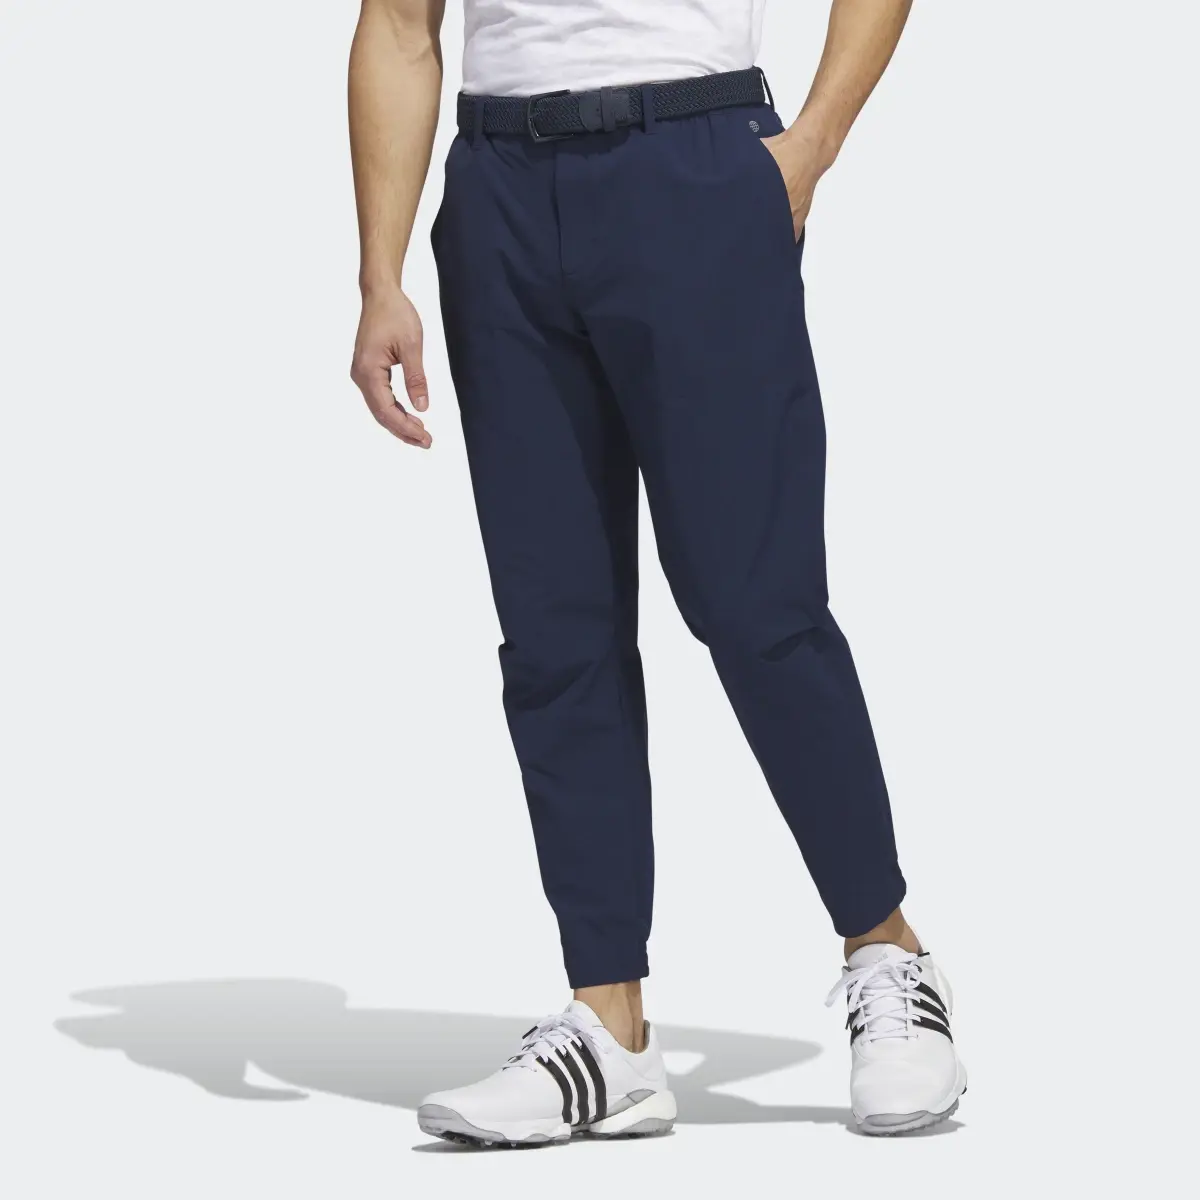 Adidas Go-To Commuter Pants. 1